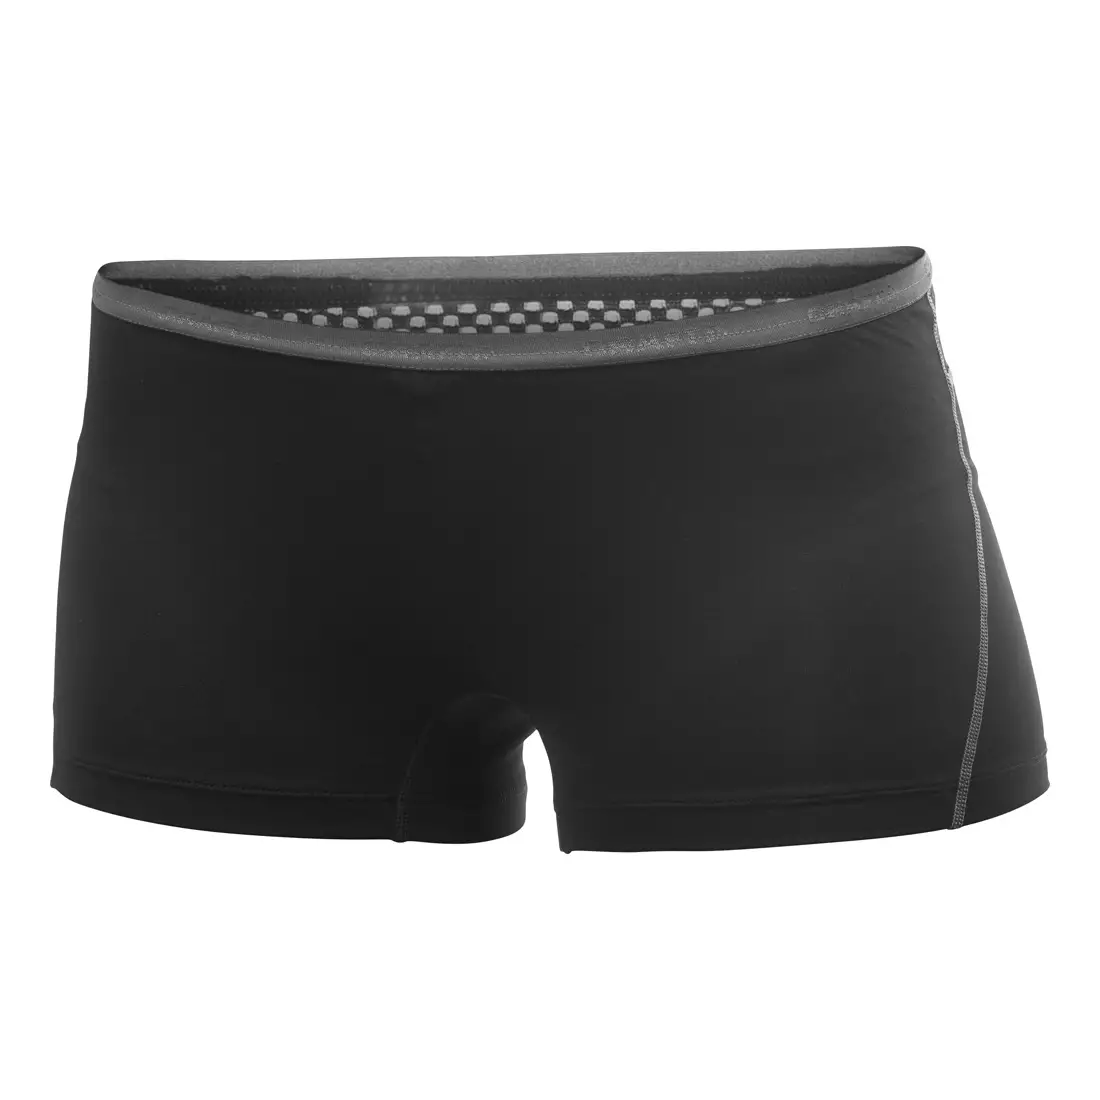 CRAFT STAY COOL - 1901975-9999 - women's thermoactive boxers